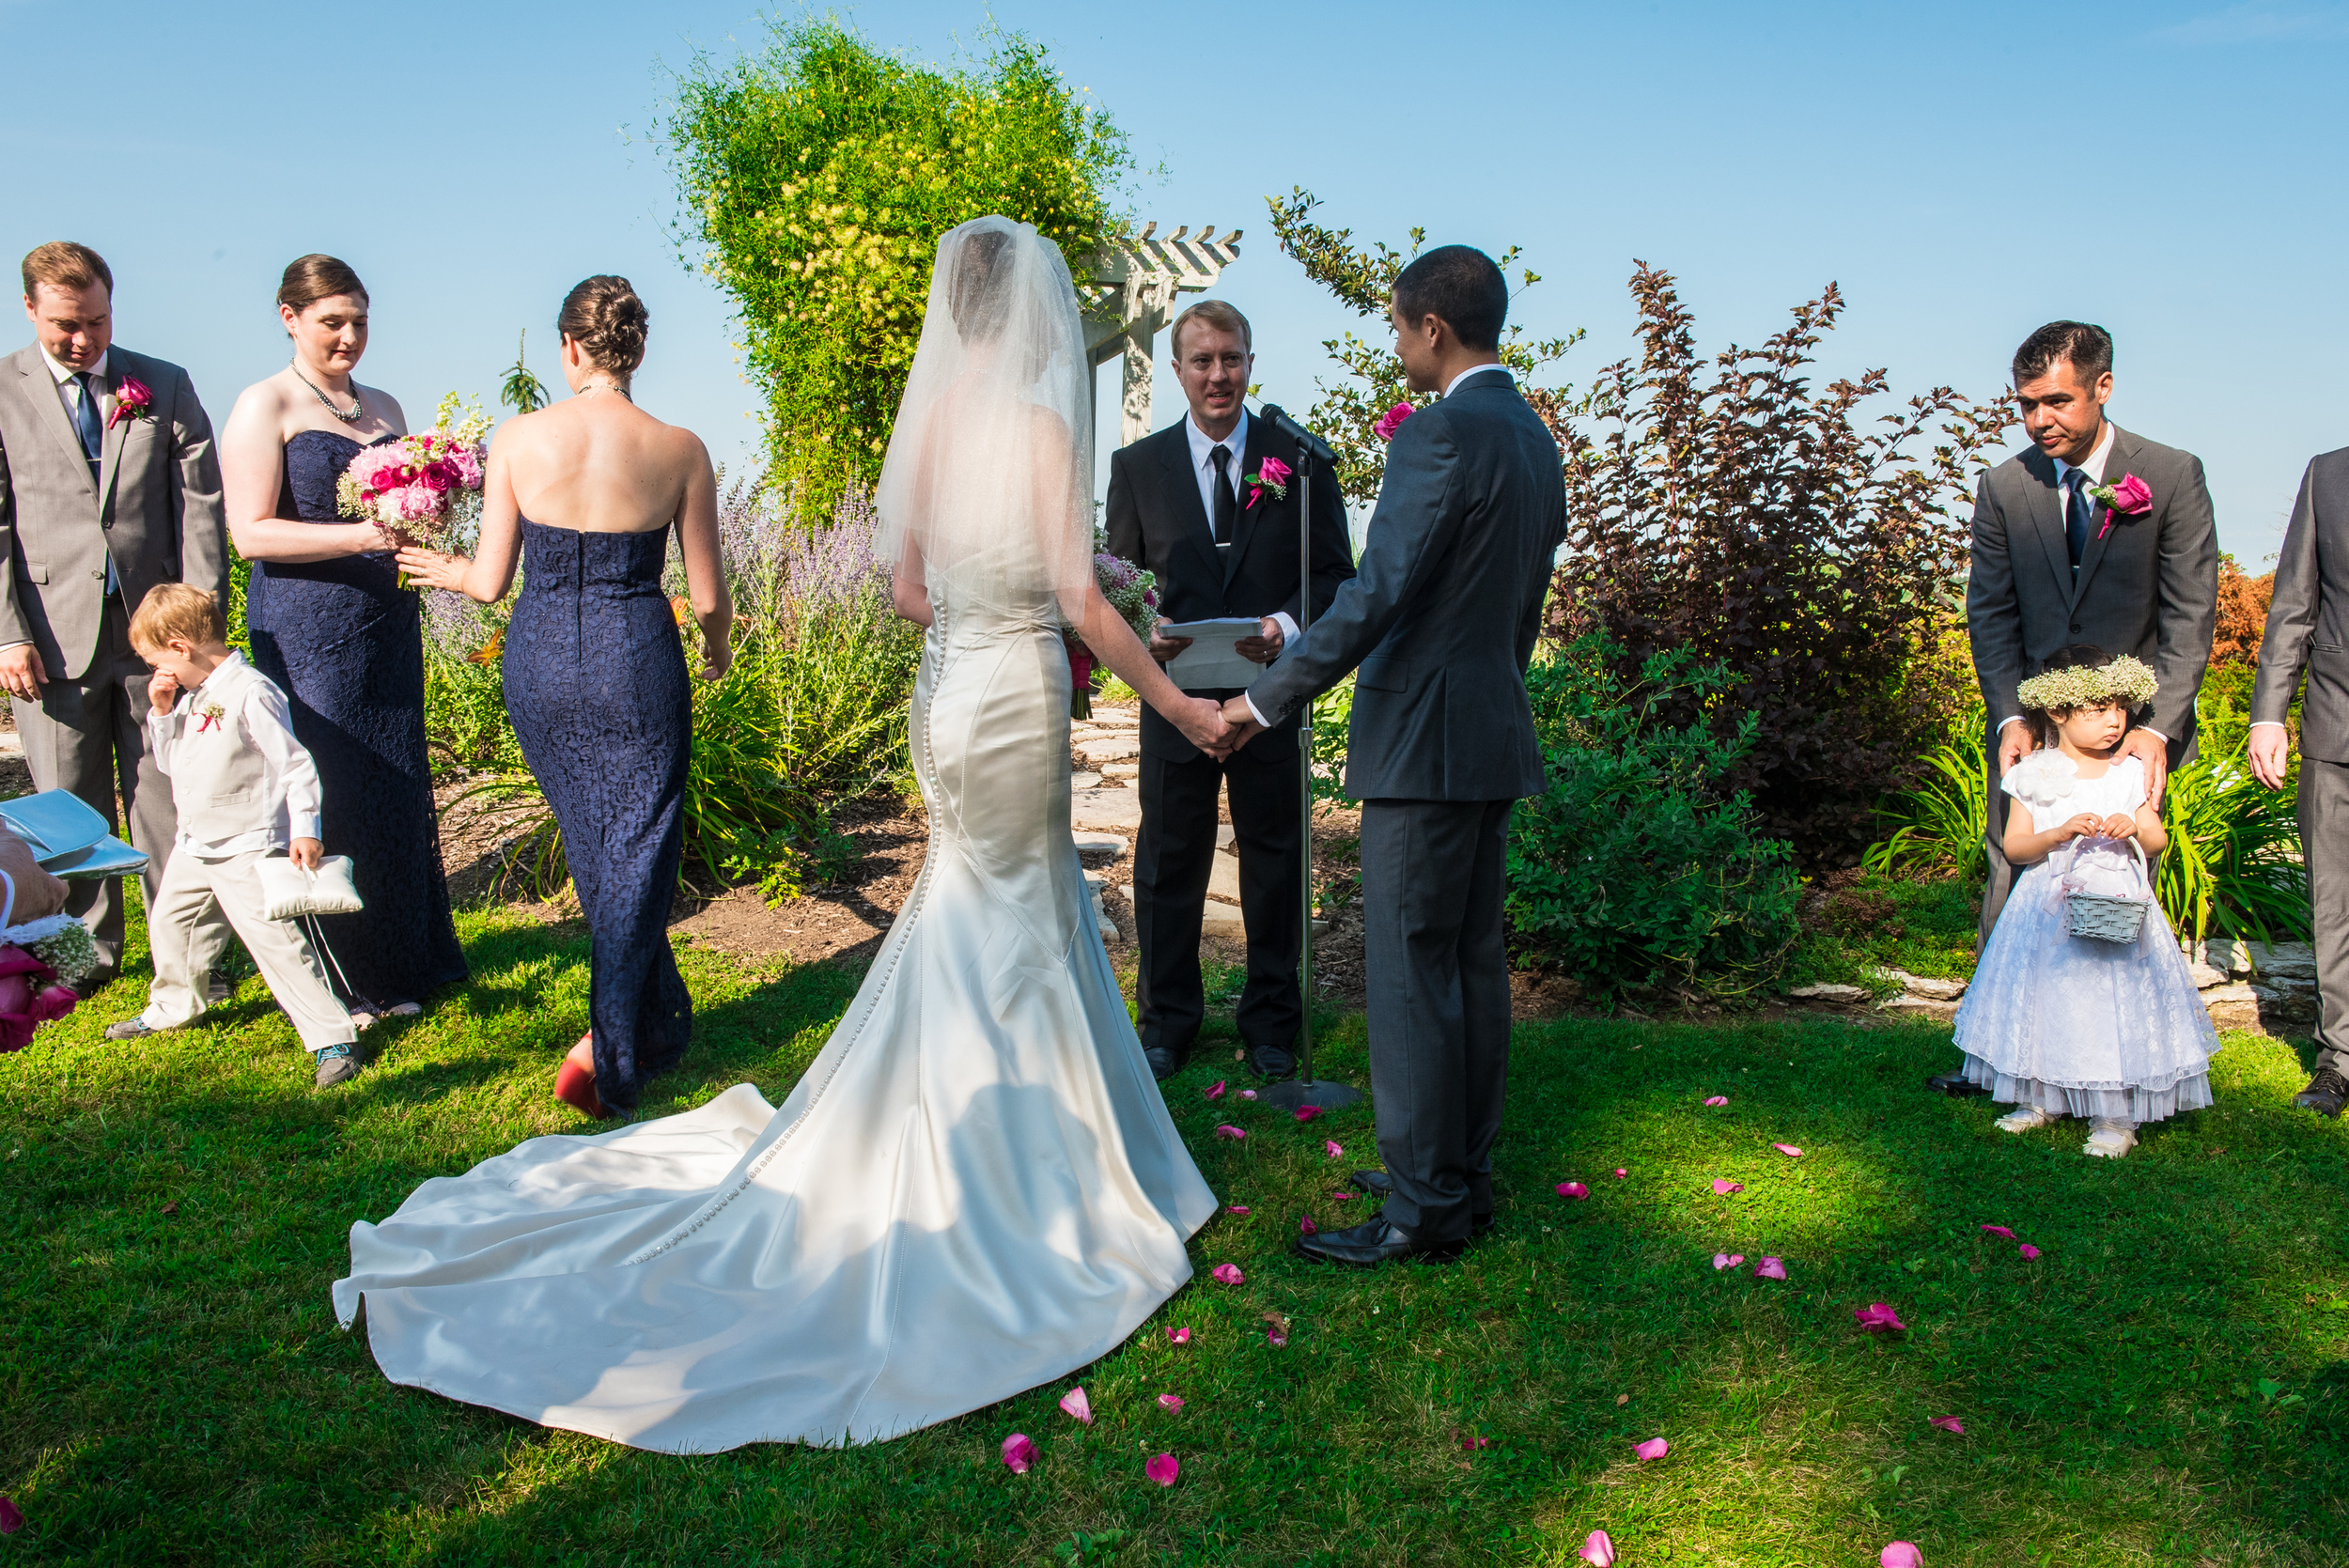 Bride and groom get married at Carpenter Nature Center wedding in Hastings, Minnesota.